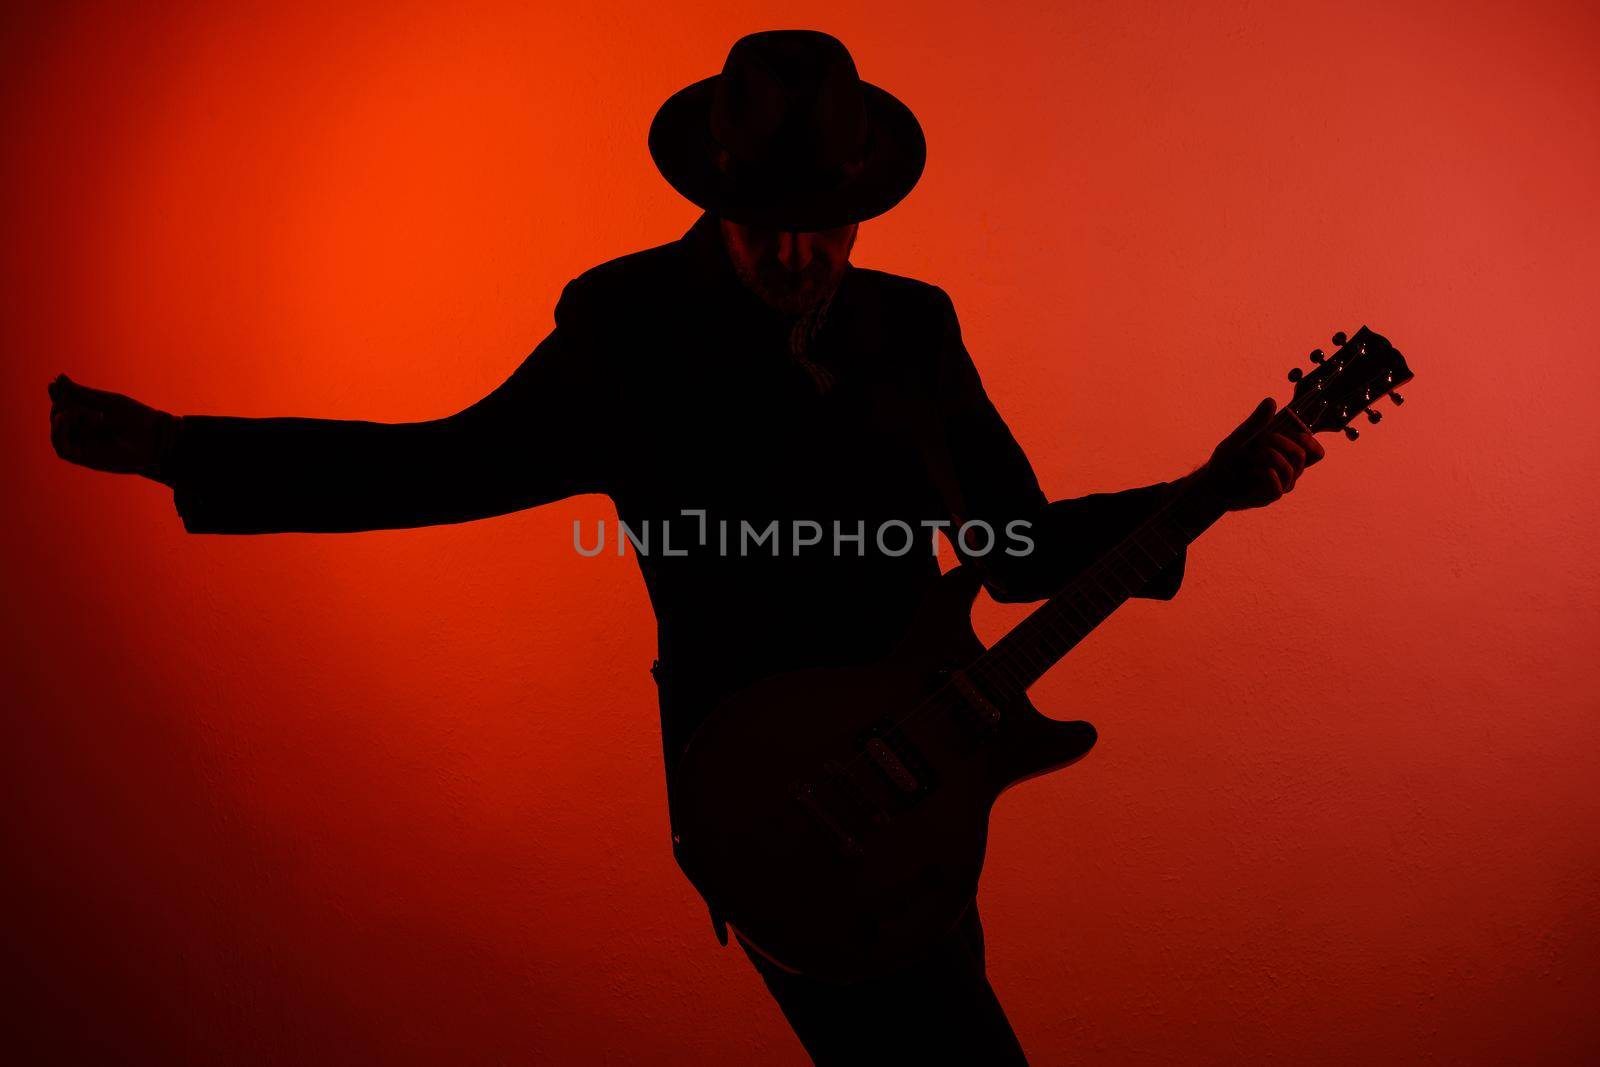 silhouette of guitarist in a hat on a red background.